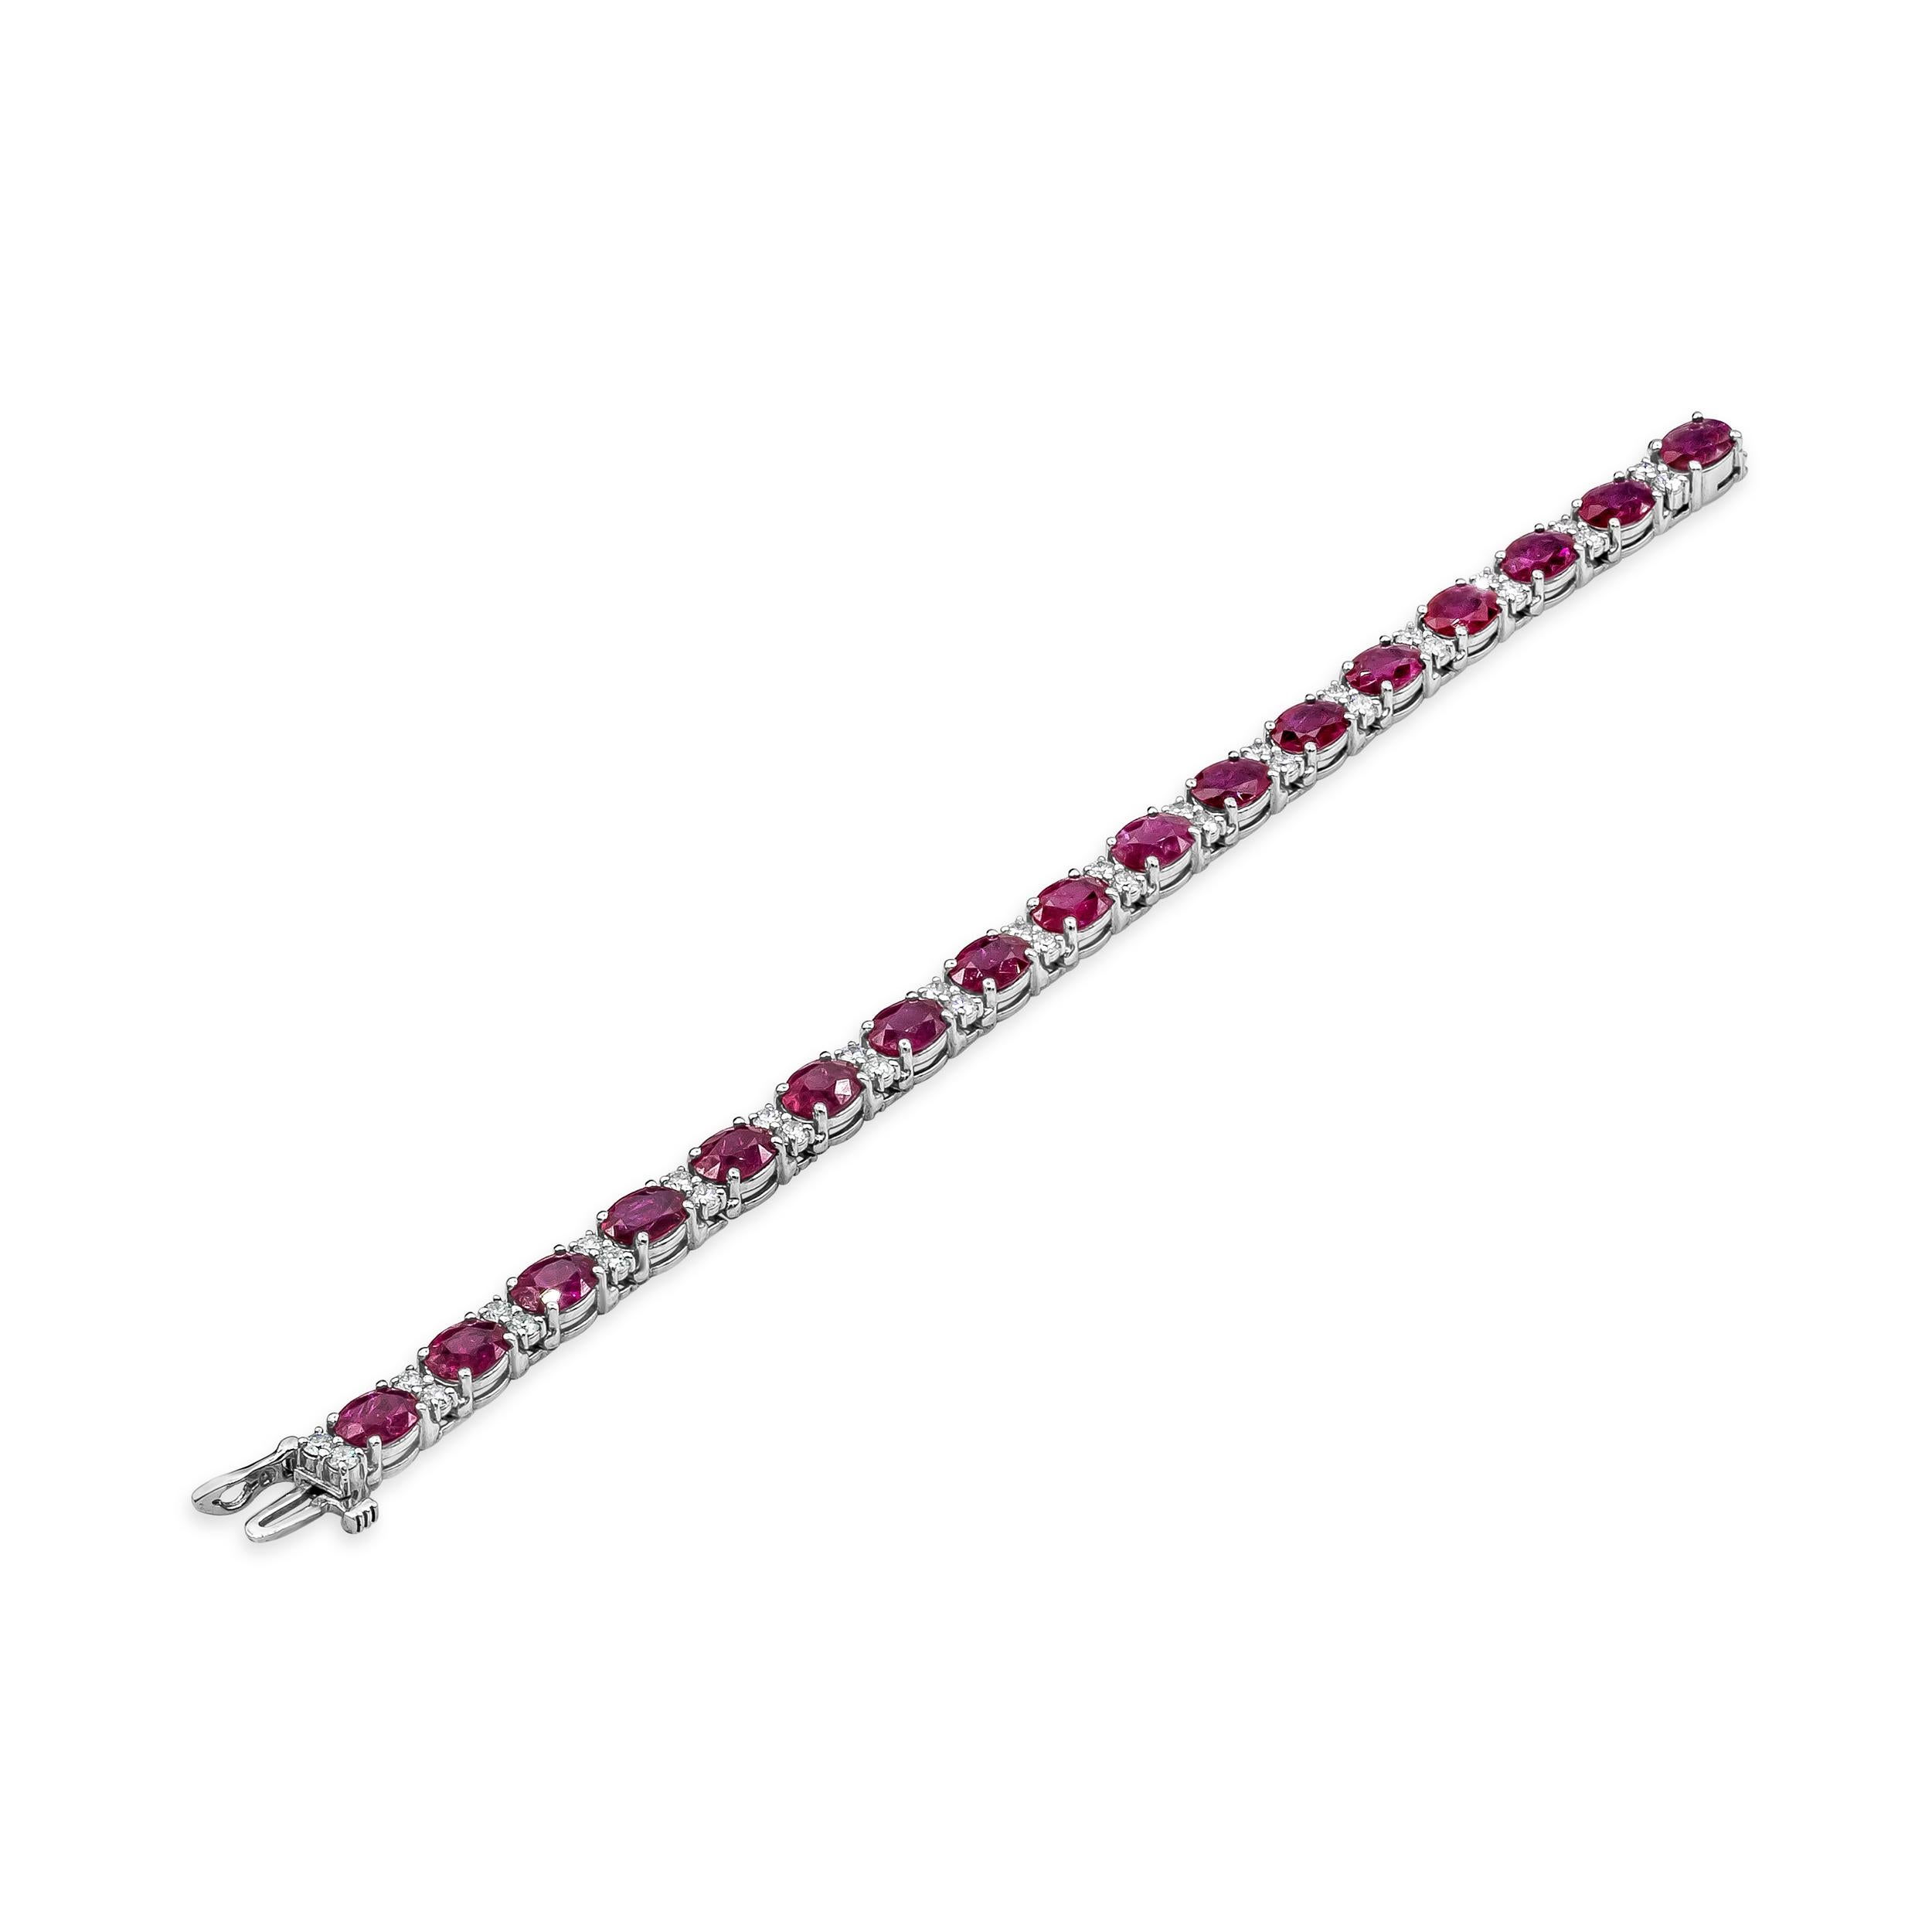 Showcasing beautiful oval cut rubies weighing 21.44 carats total, each spaced by round brilliant diamonds weighing 2.53 carats total. Made in 14k white gold. 

